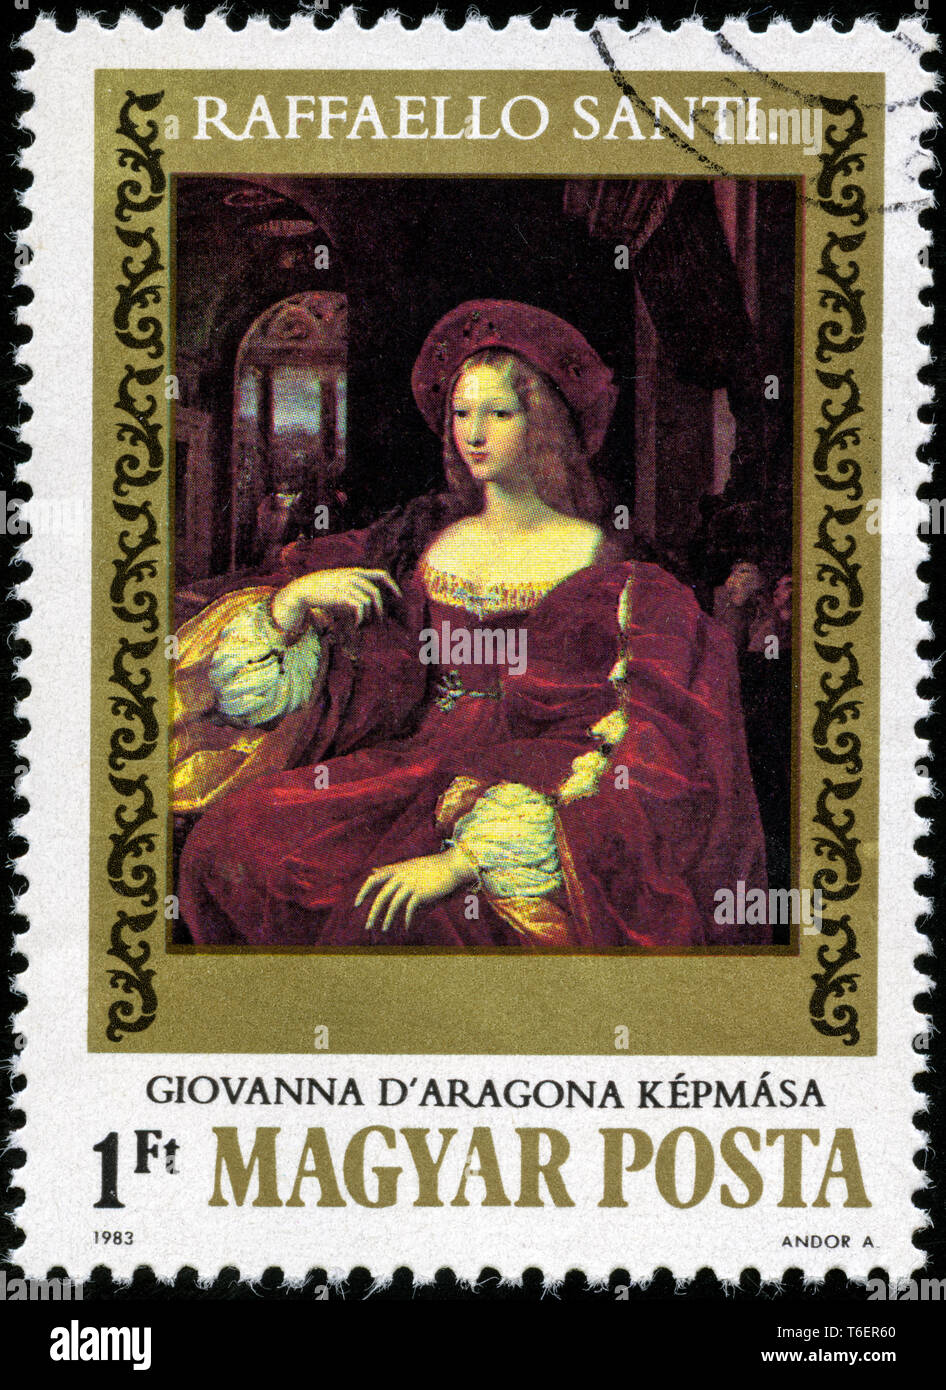 Postage stamp from Hungary in the Paintings by Raffaello Santi series issued in 1983 Stock Photo